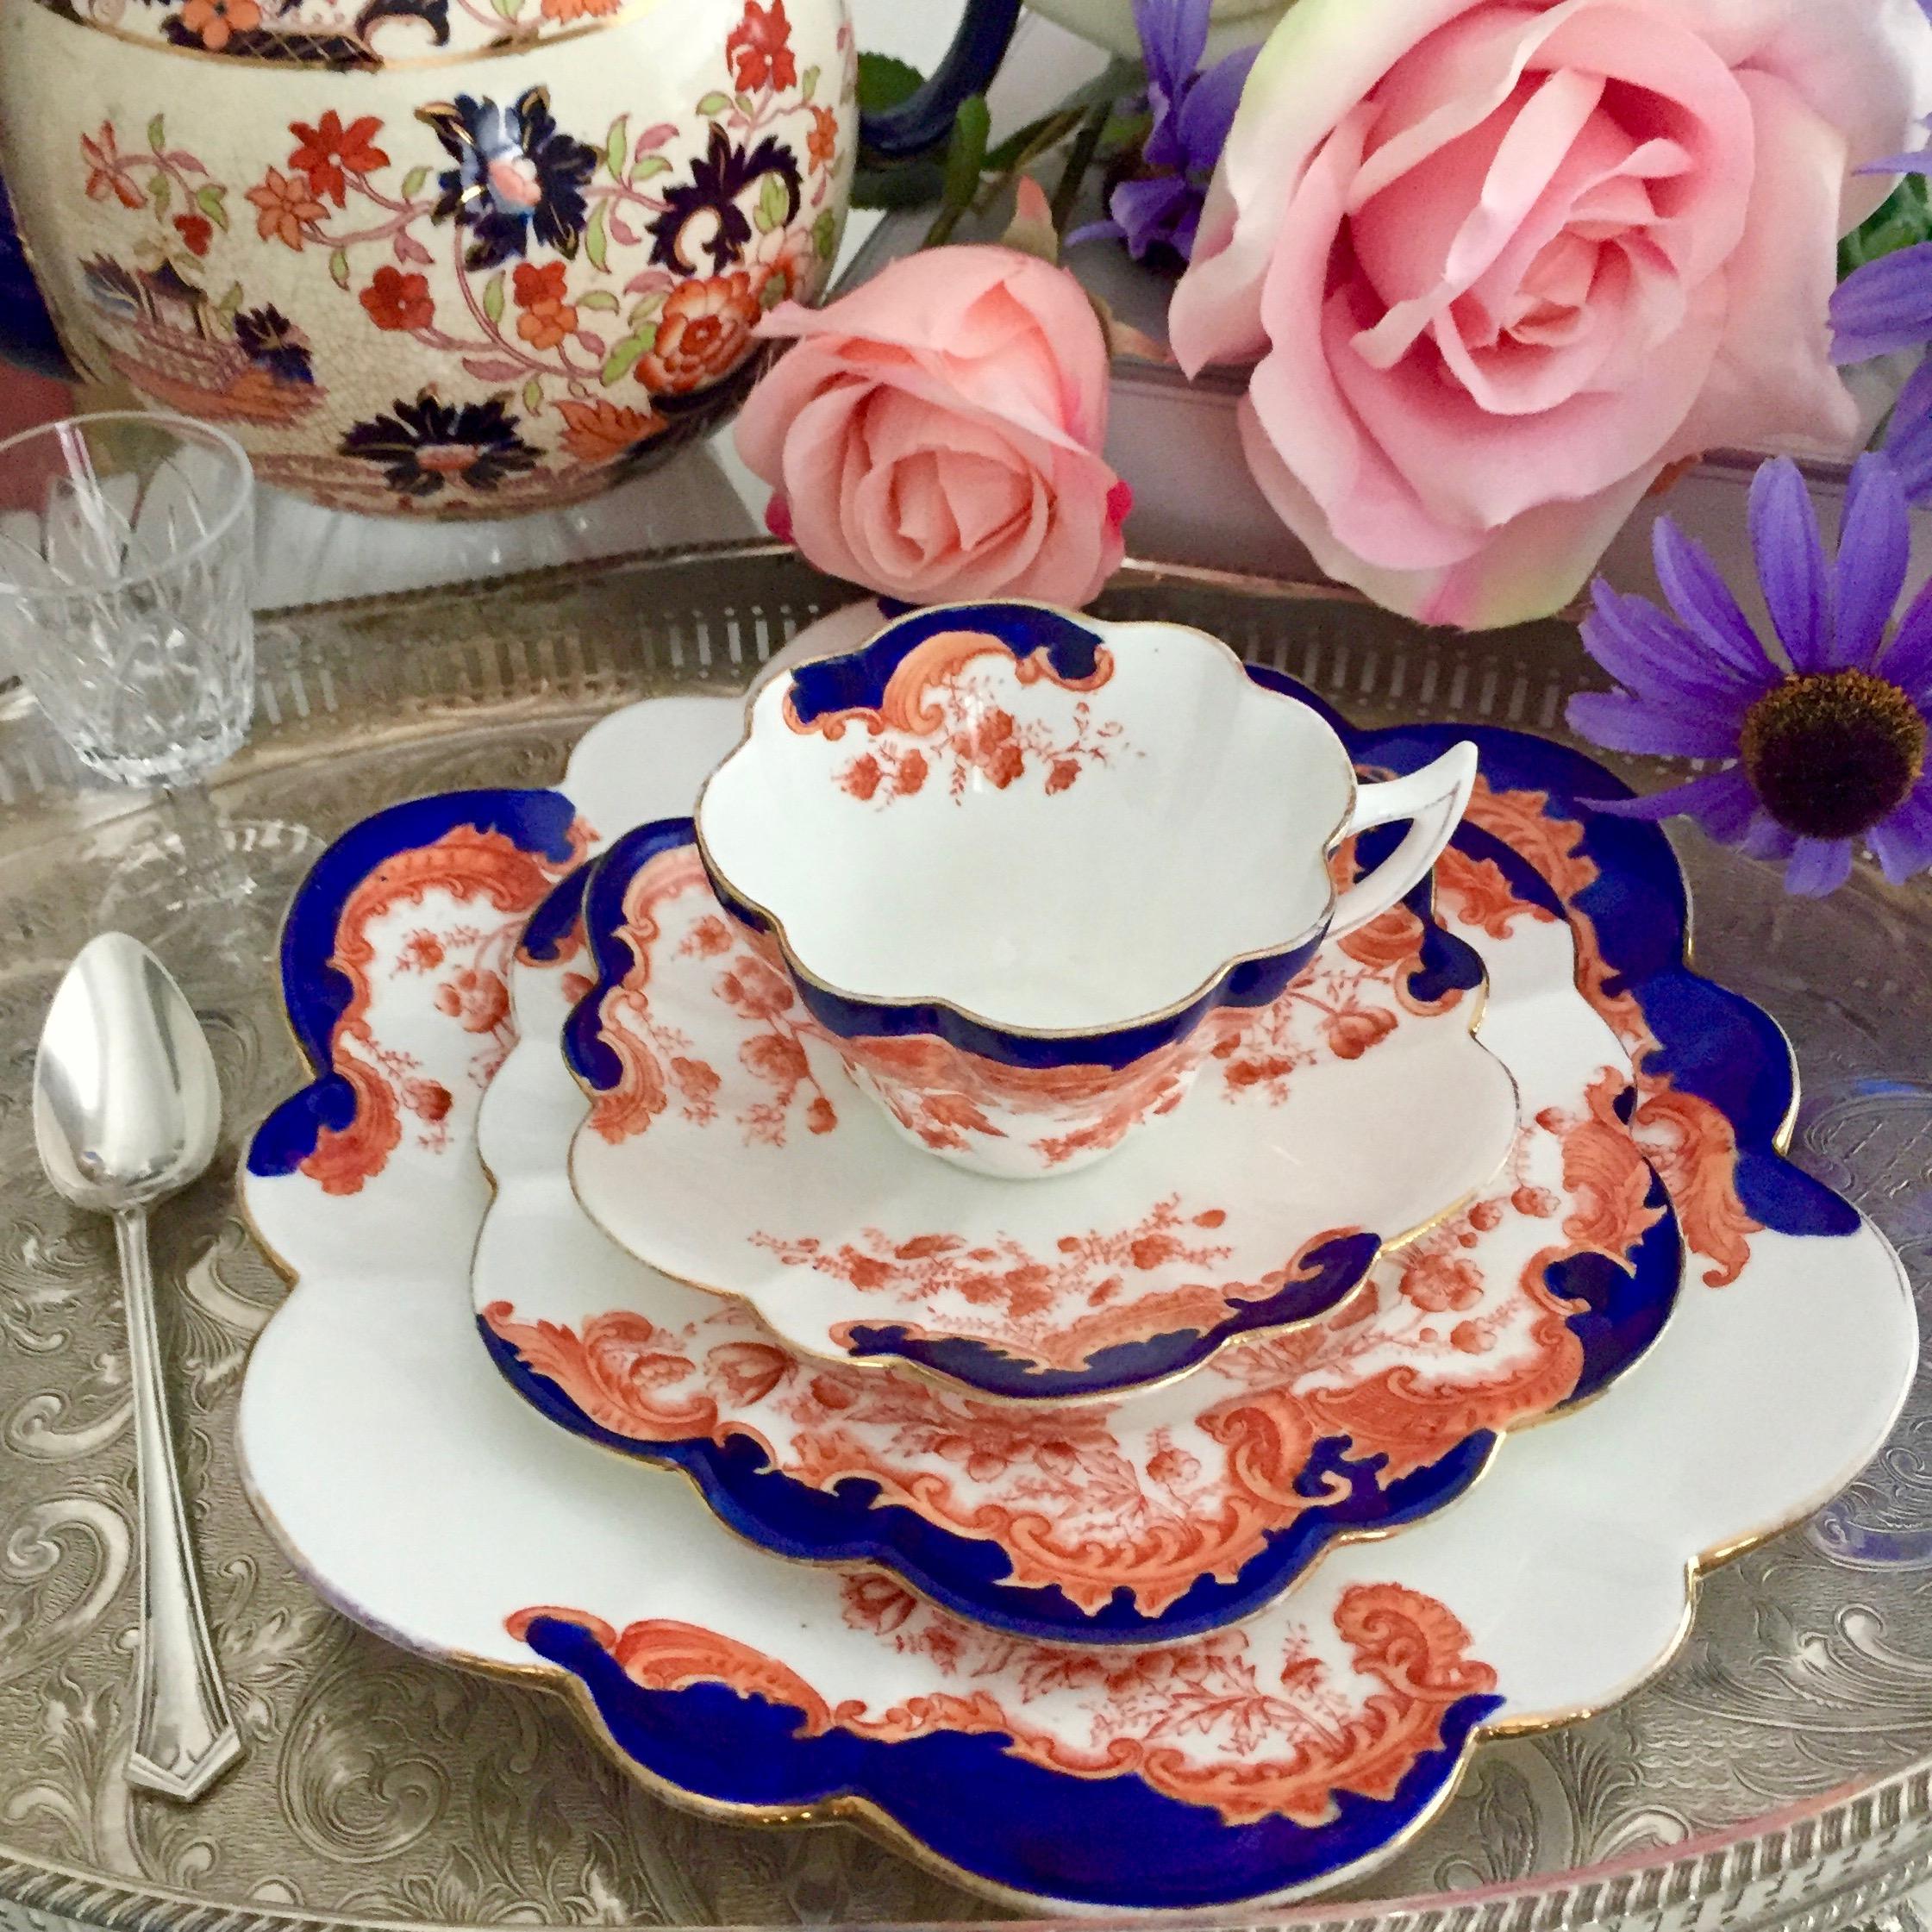 This is a porcelain teacup quartet made by Wileman & Co in 1902, which was the Art Nouveau period. It is decorated in a Japanese-inspired design. It consists of a teacup, saucer, side plate and a large cake plate. 

This is a very desired design